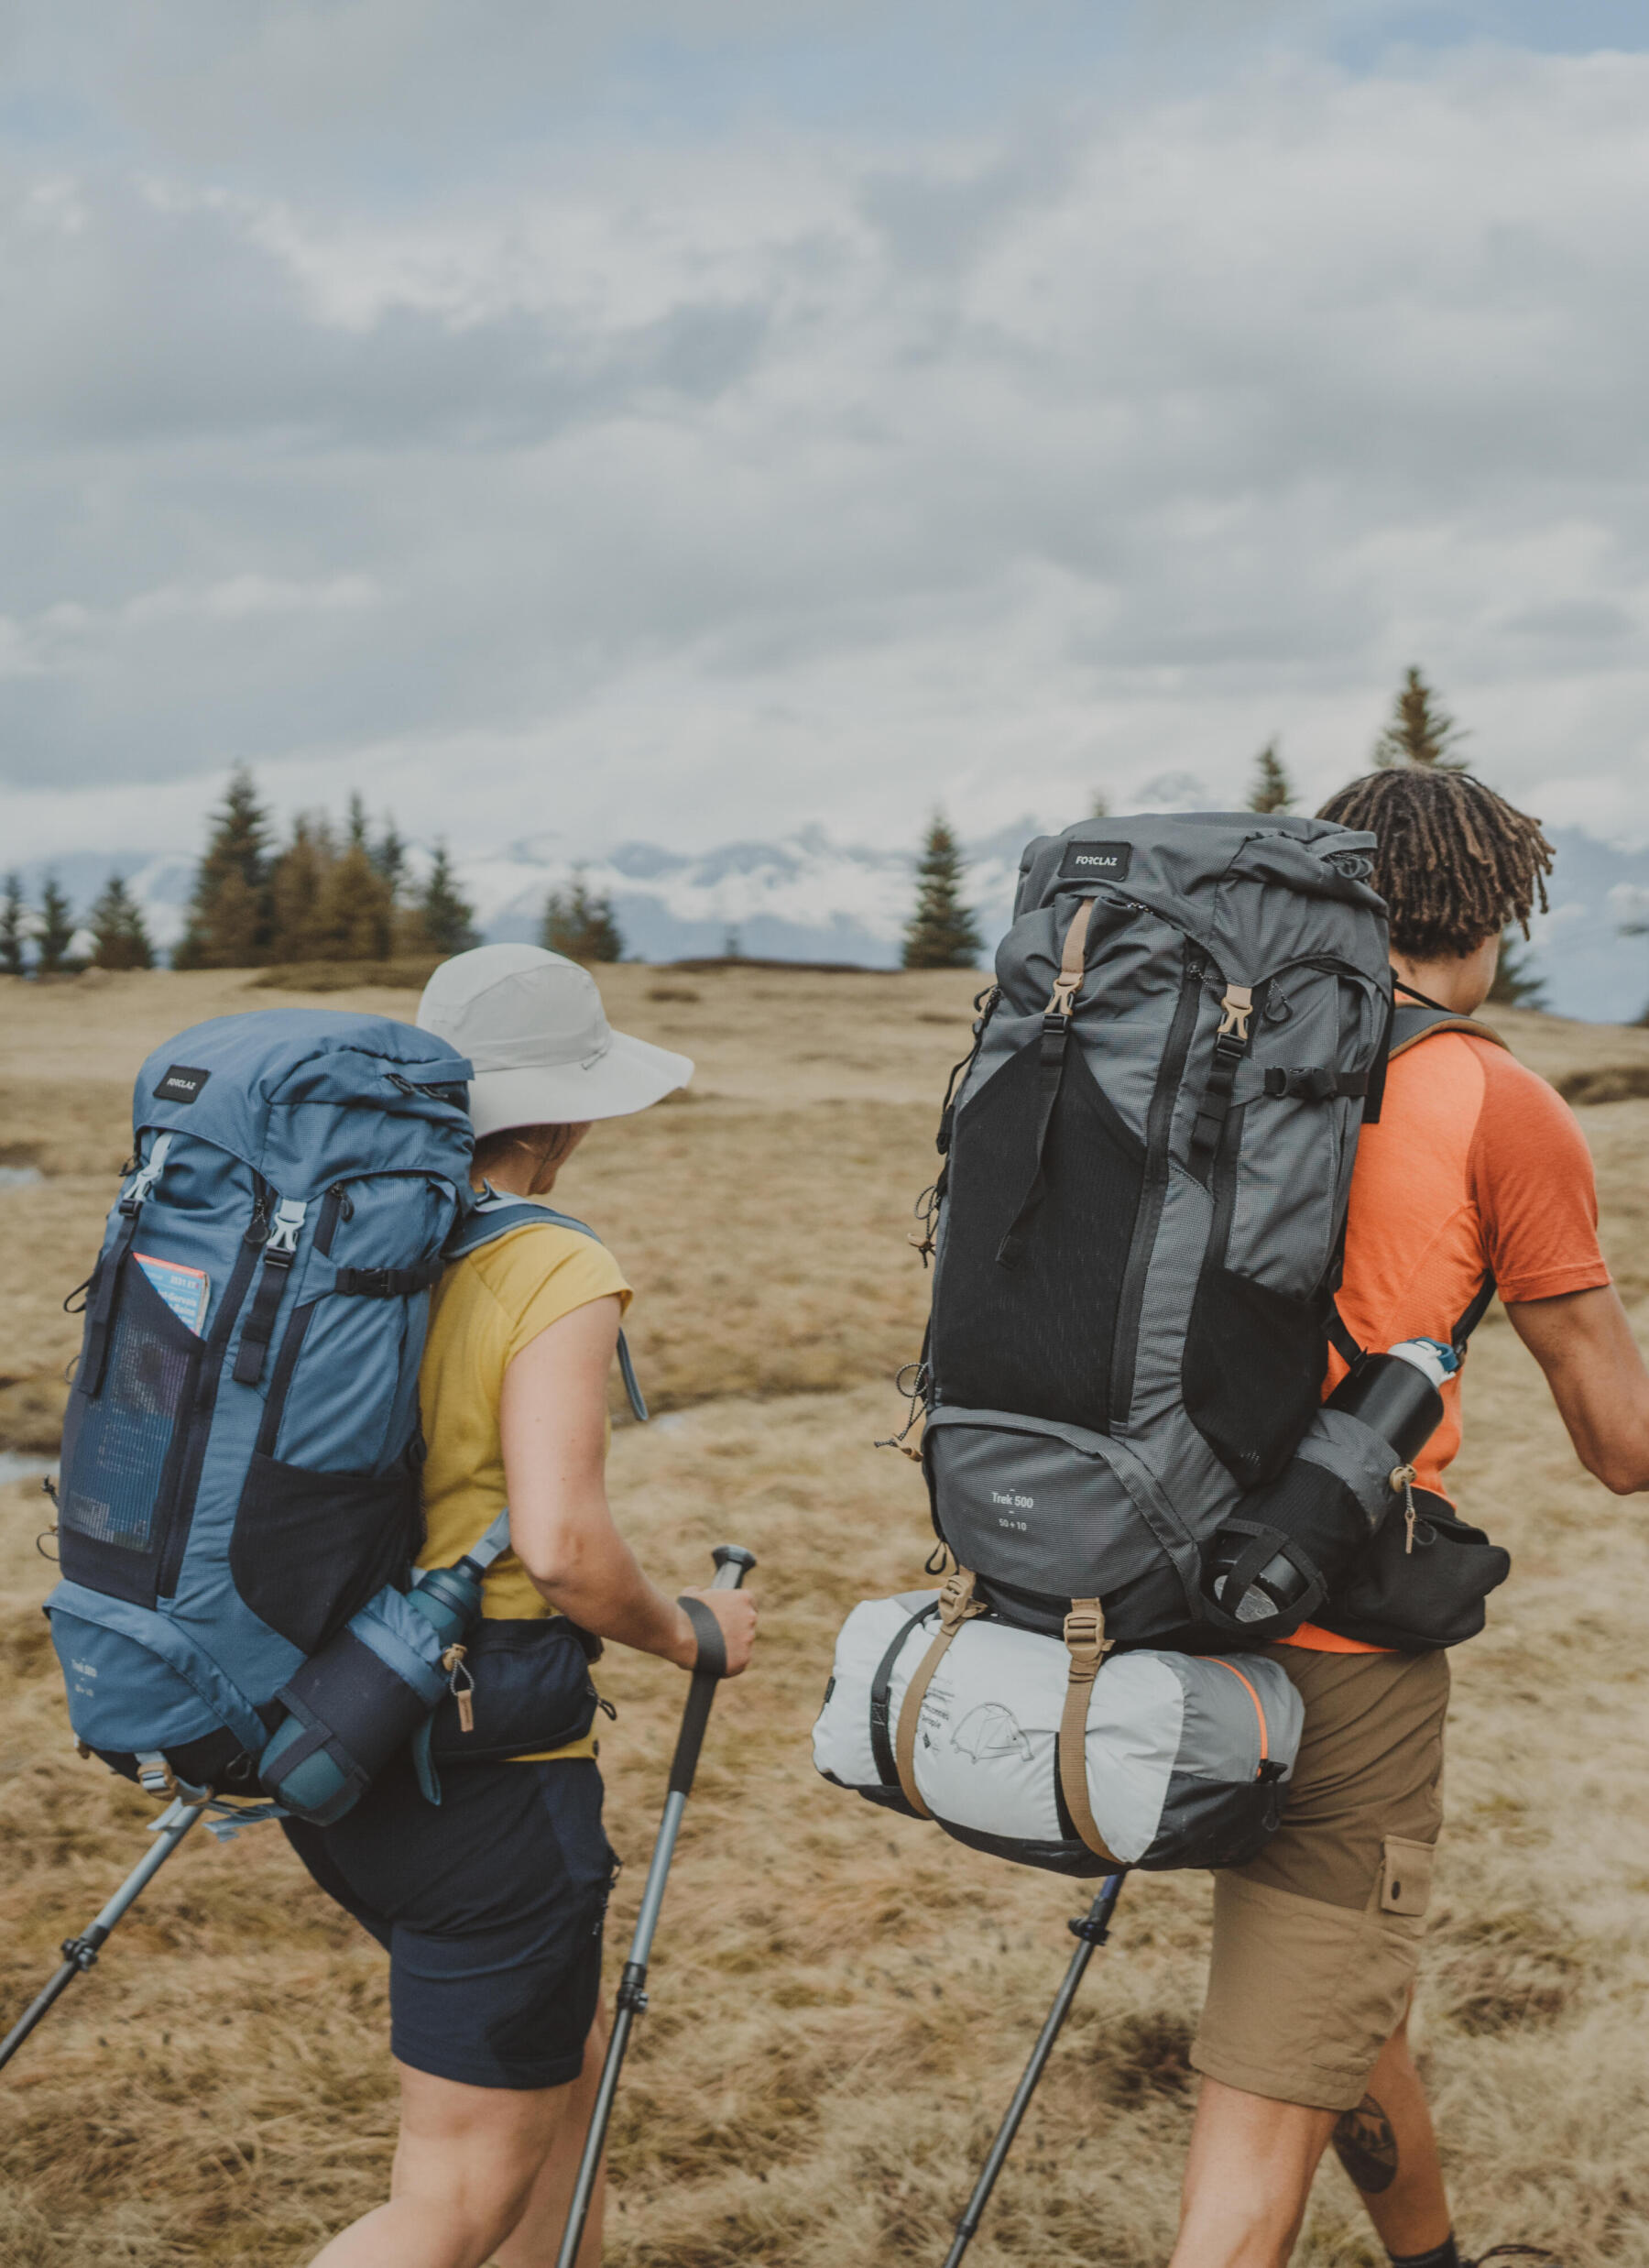 How to Choose Best Backpack for Hiking?